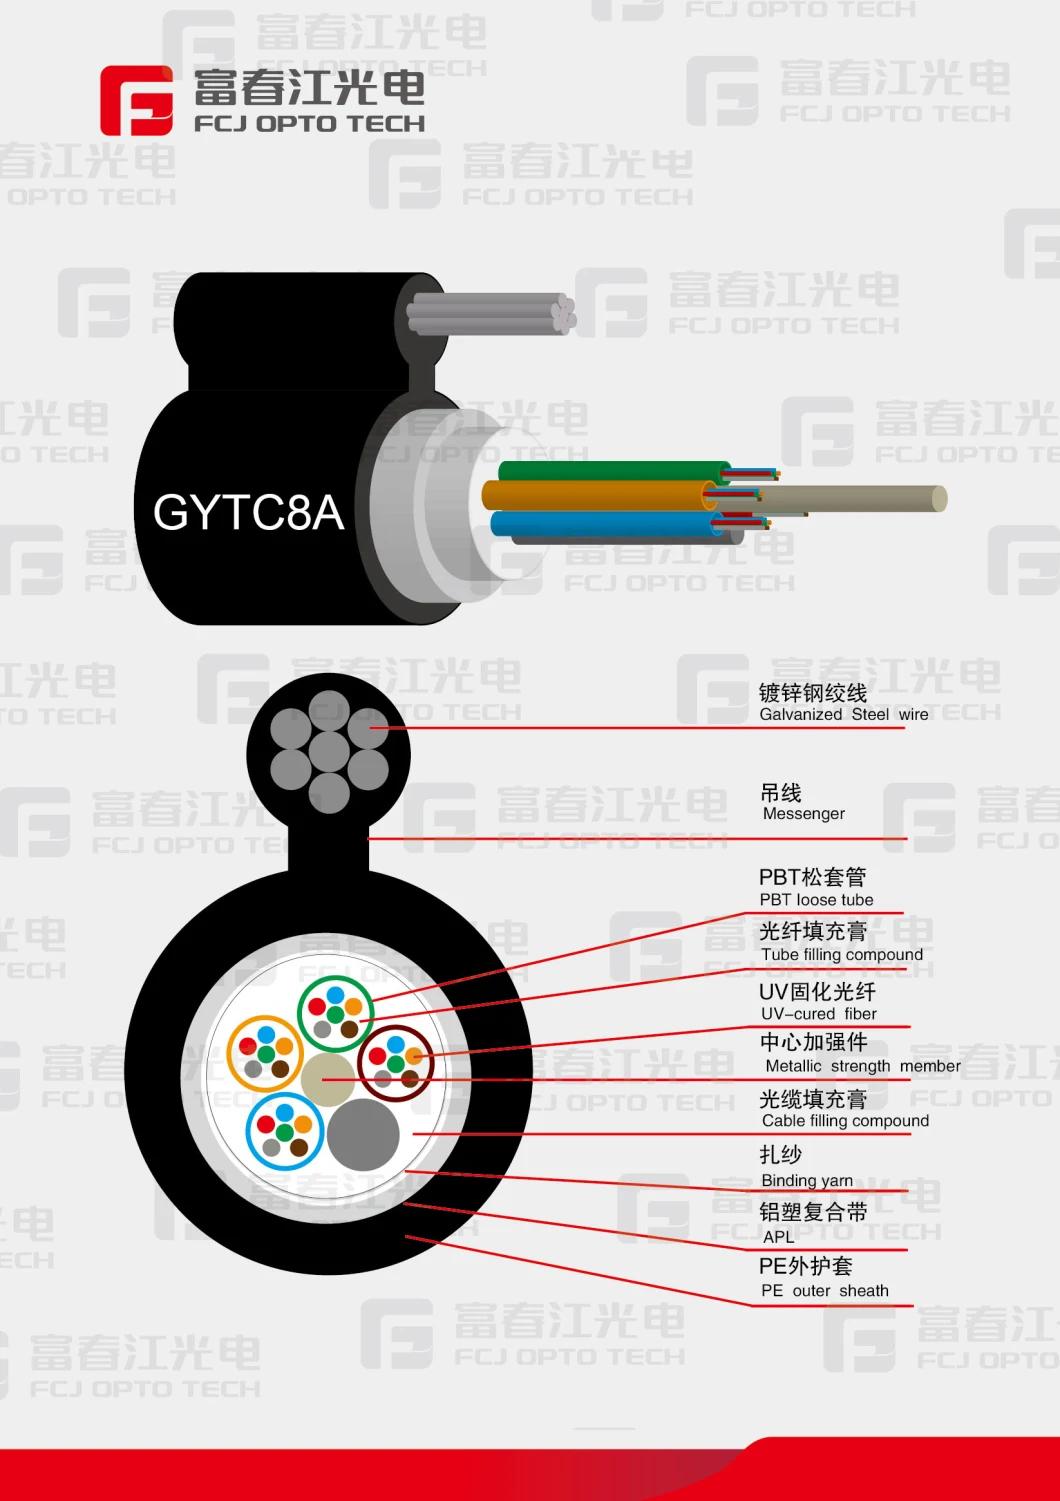 Galvanized Steel Wire Fig 8 Aerial Fiber Optical Cable 2-144cores Gytc8a